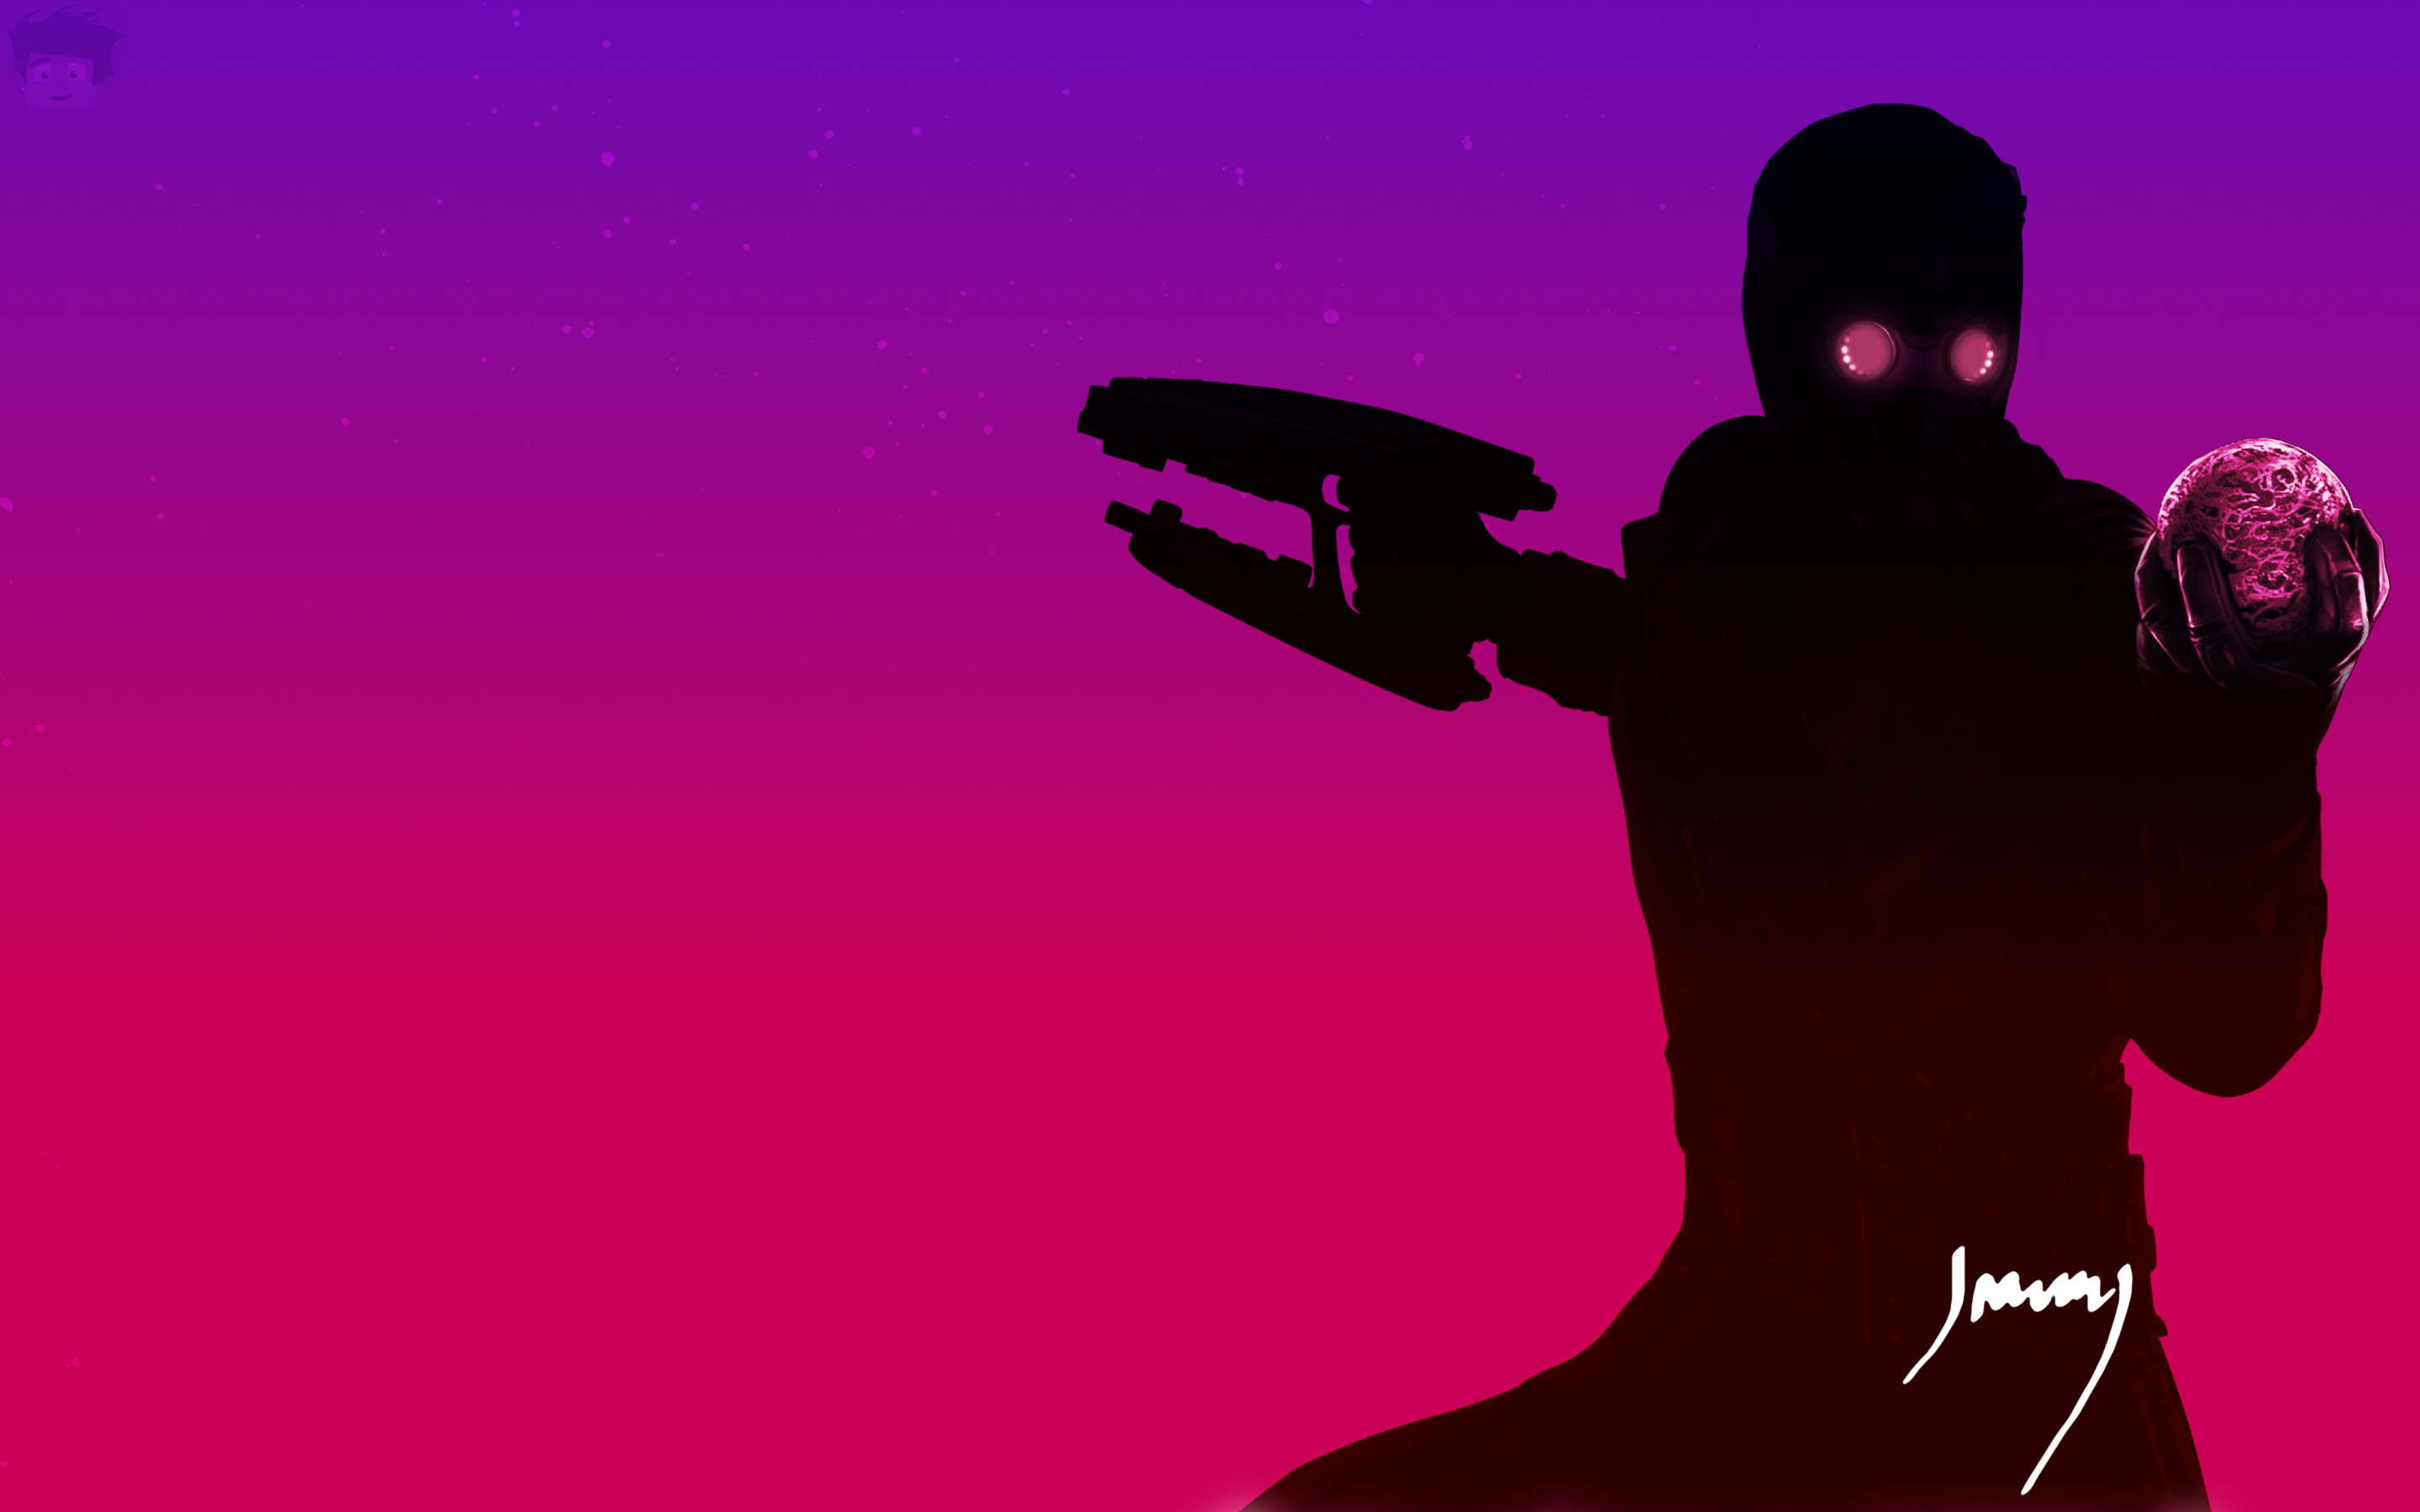 2880x1800 Guardians of the Galaxy - Star Lord Desktop BG by NalbisArts on .